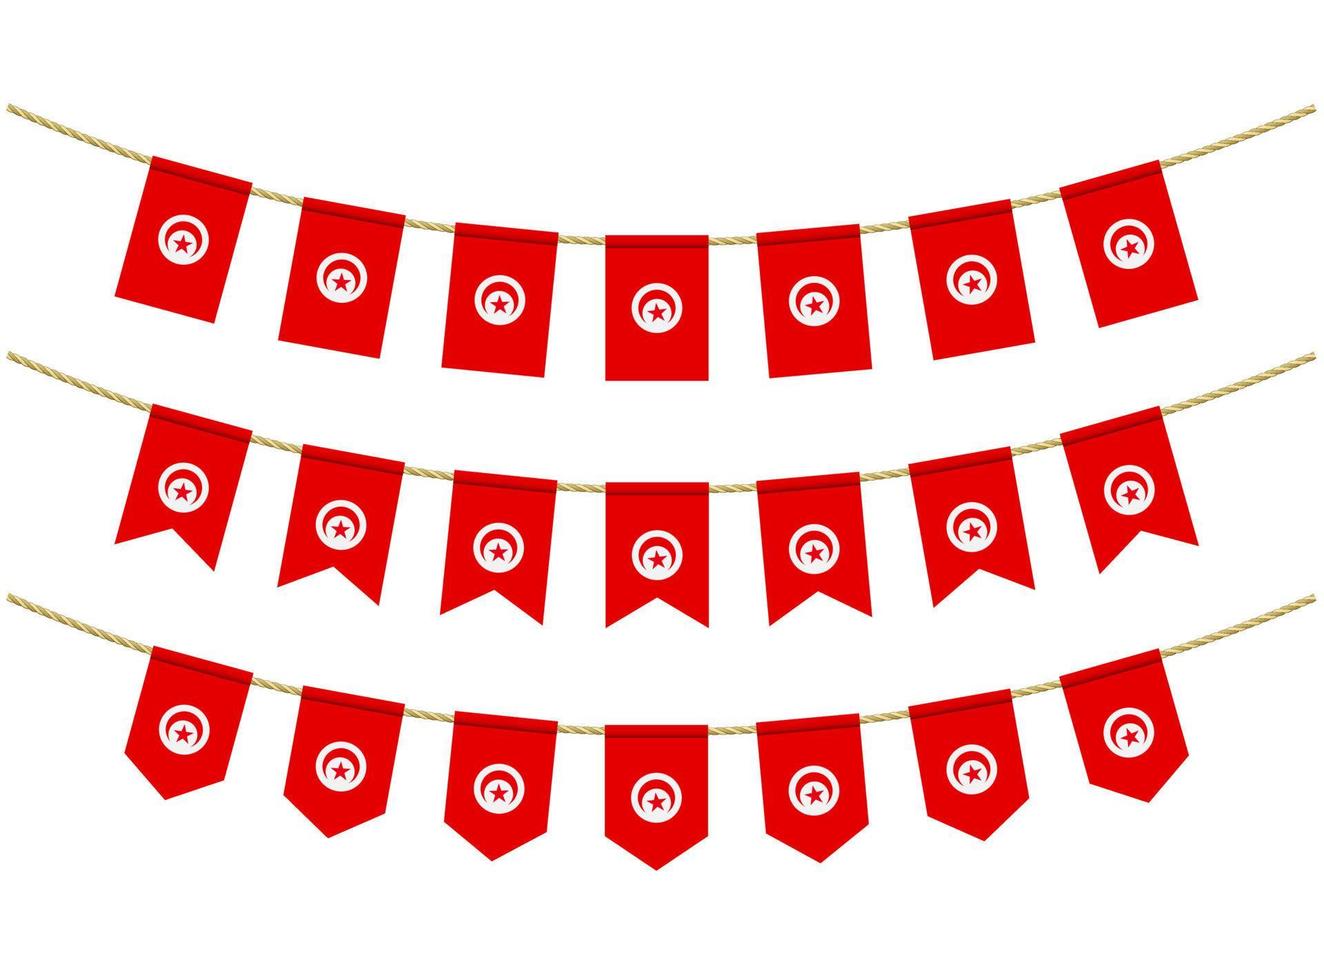 Tunisia flag on the ropes on white background. Set of Patriotic bunting flags. Bunting decoration of Tunisia flag vector